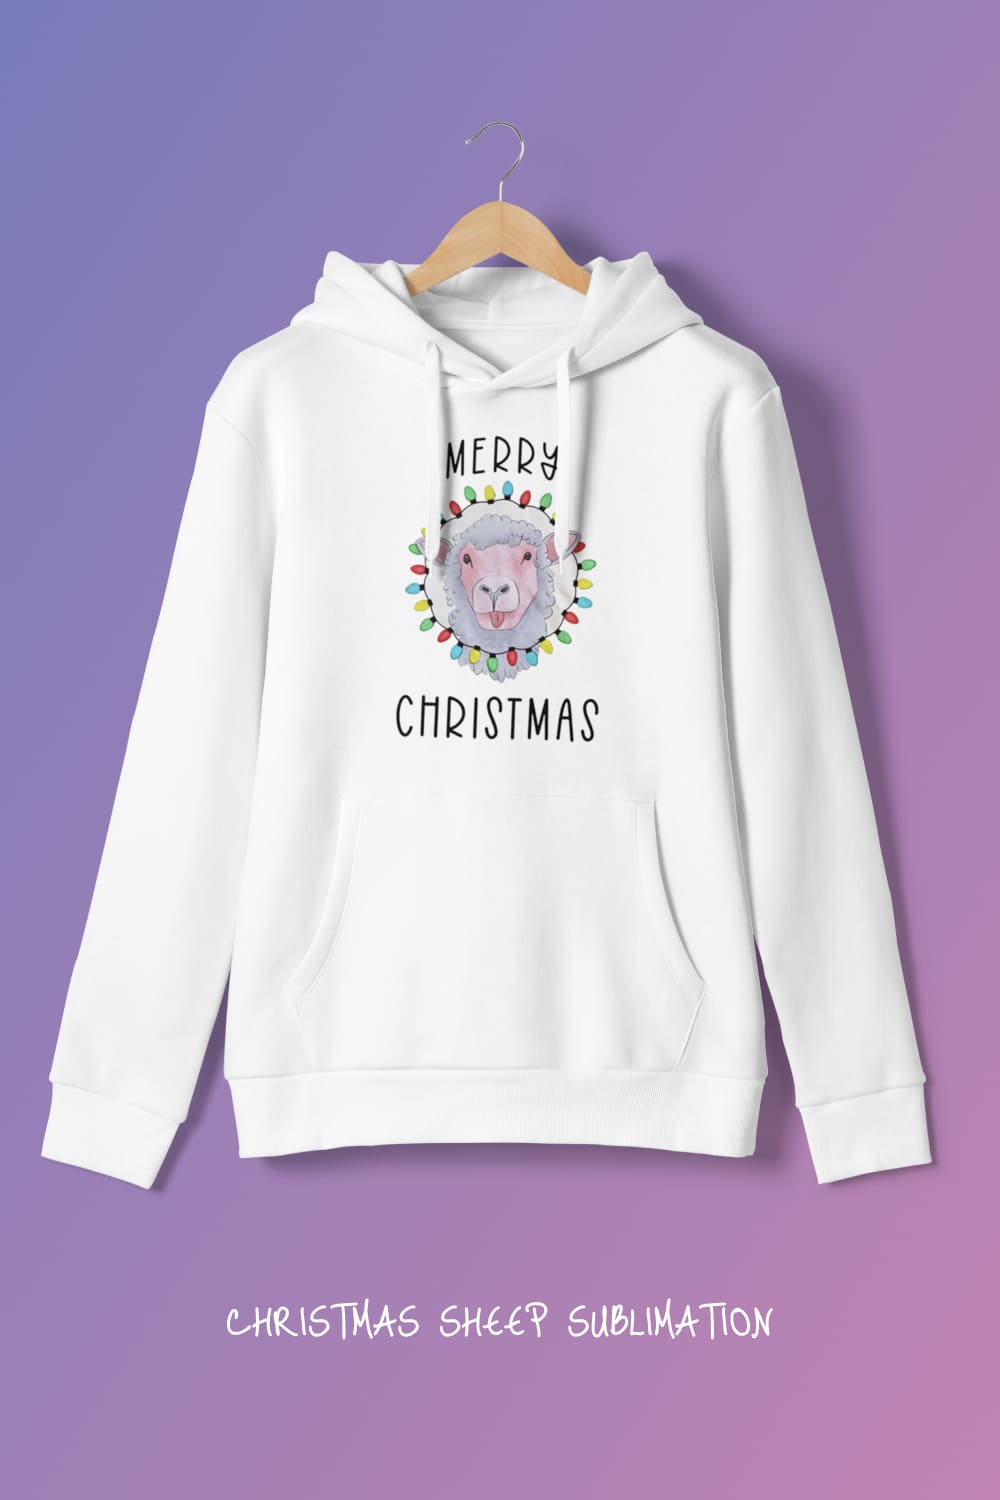 White sweatshirt with an amazing print of a cheerful sheep shrouded in lights.